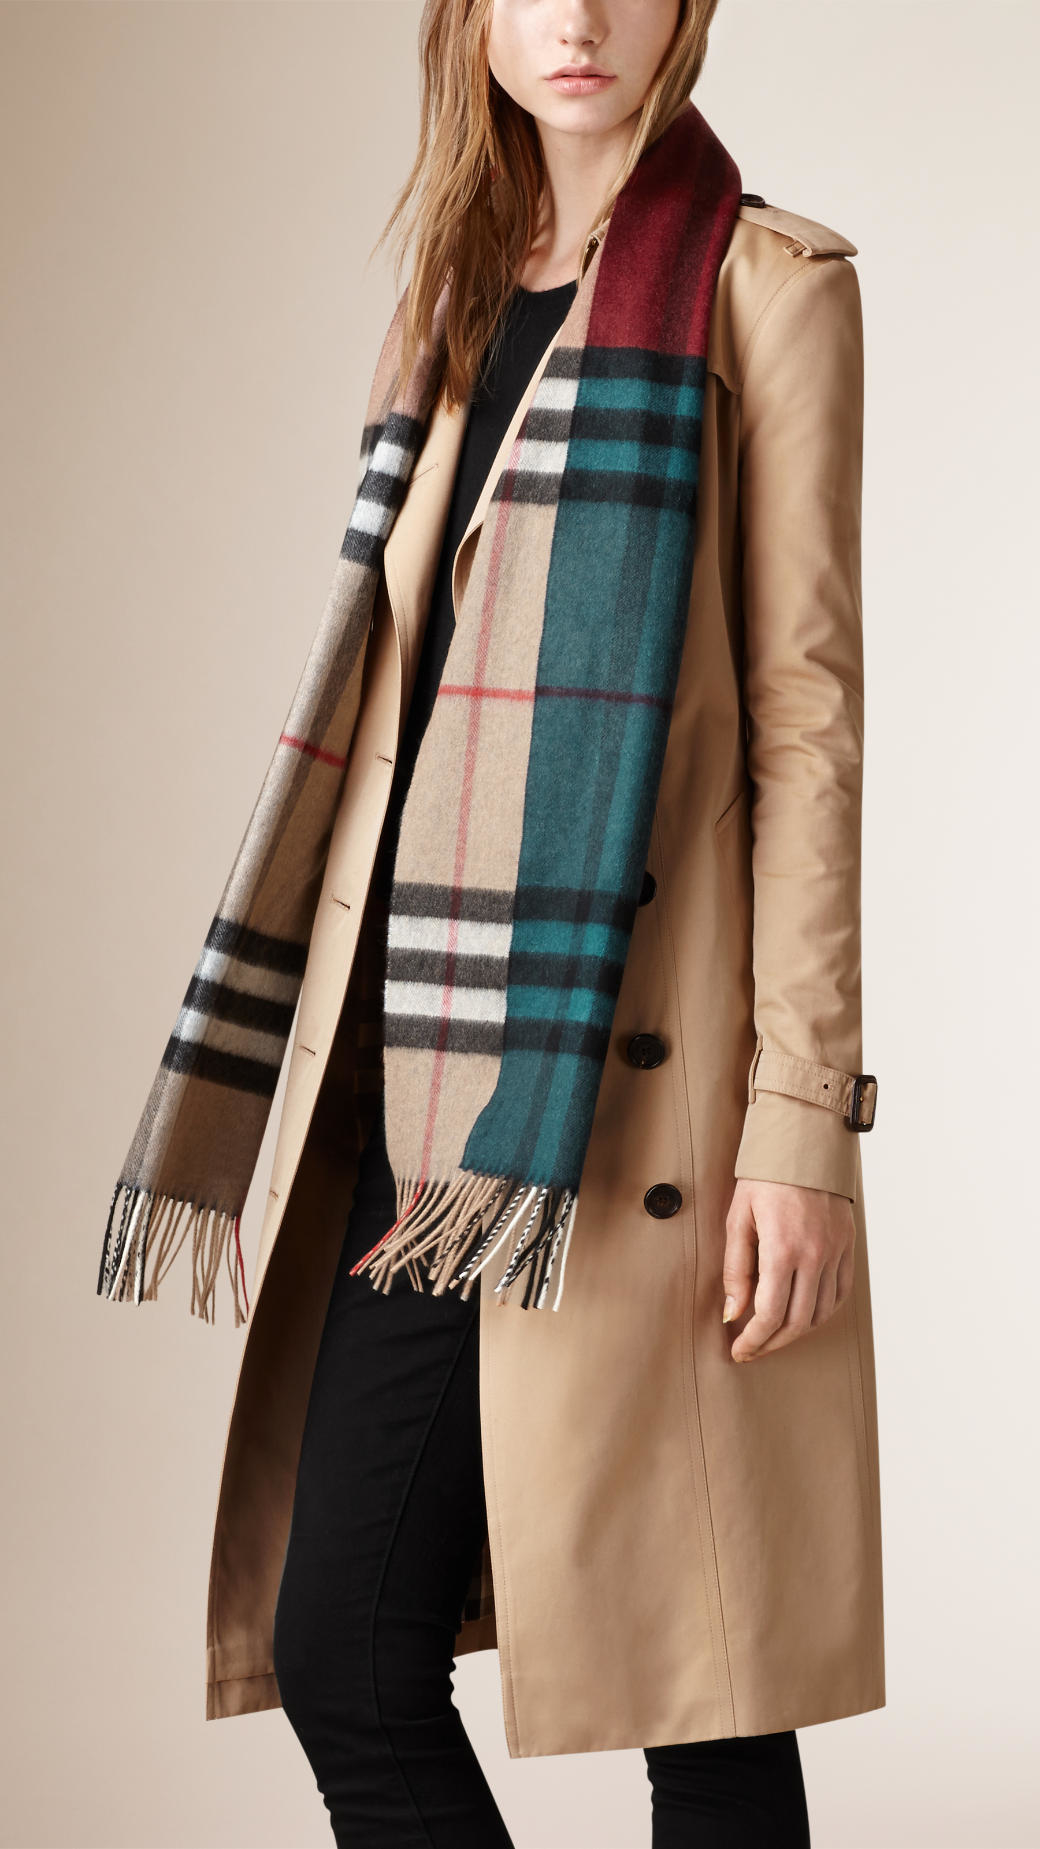 Burberry Check Cashmere Scarf in Teal/Camel (Blue) for Men - Lyst